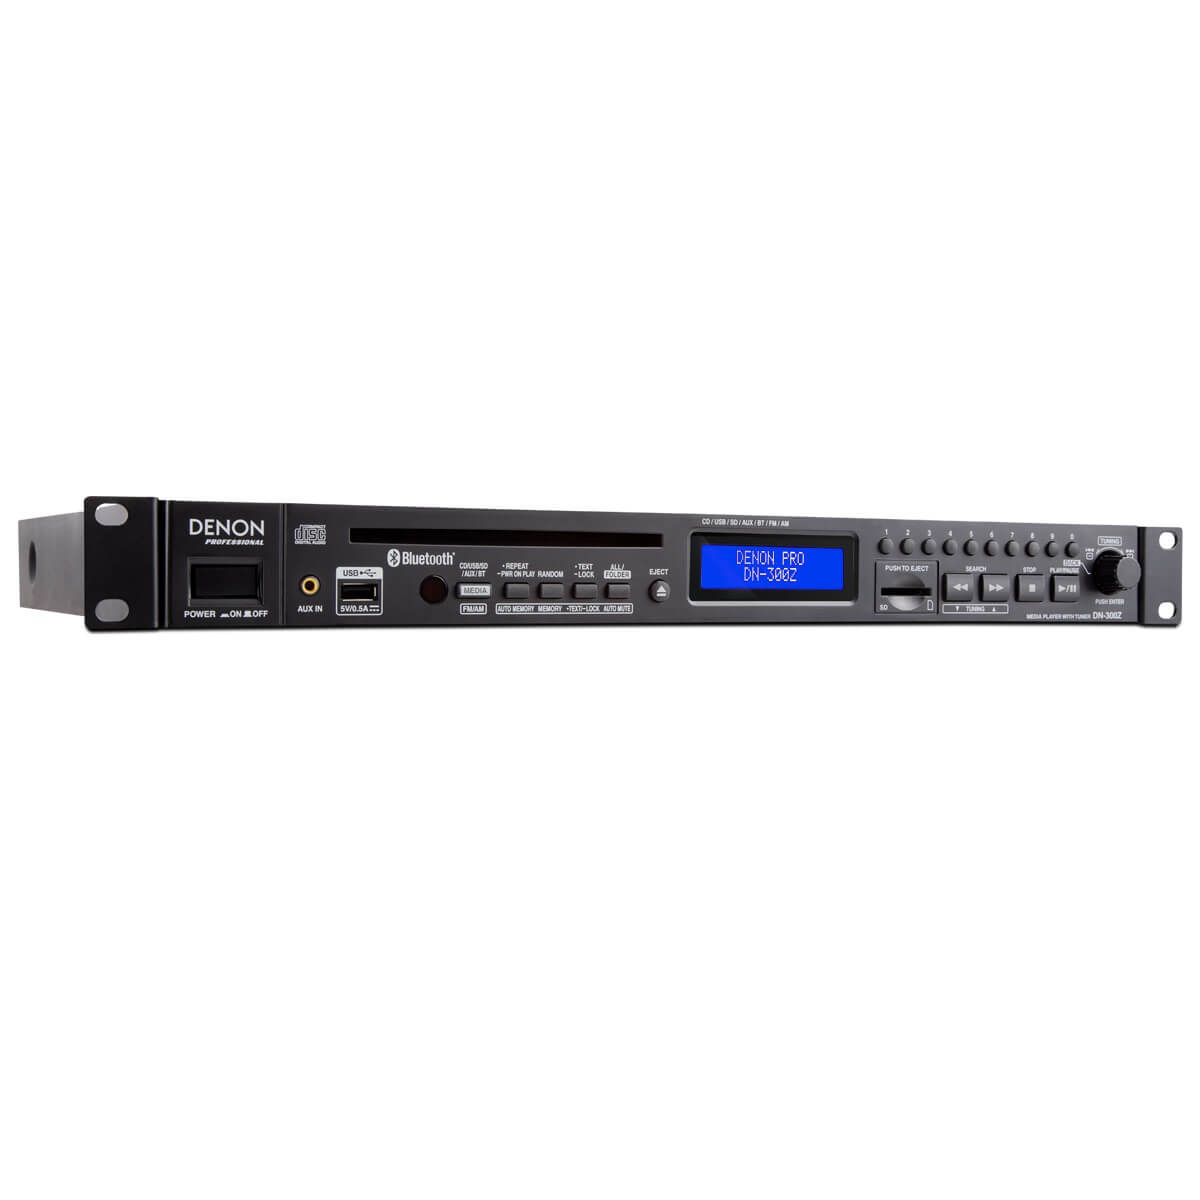 Denon DN-300Z Media Player with Bluetooth Receiver and AM/FM Tuner, left